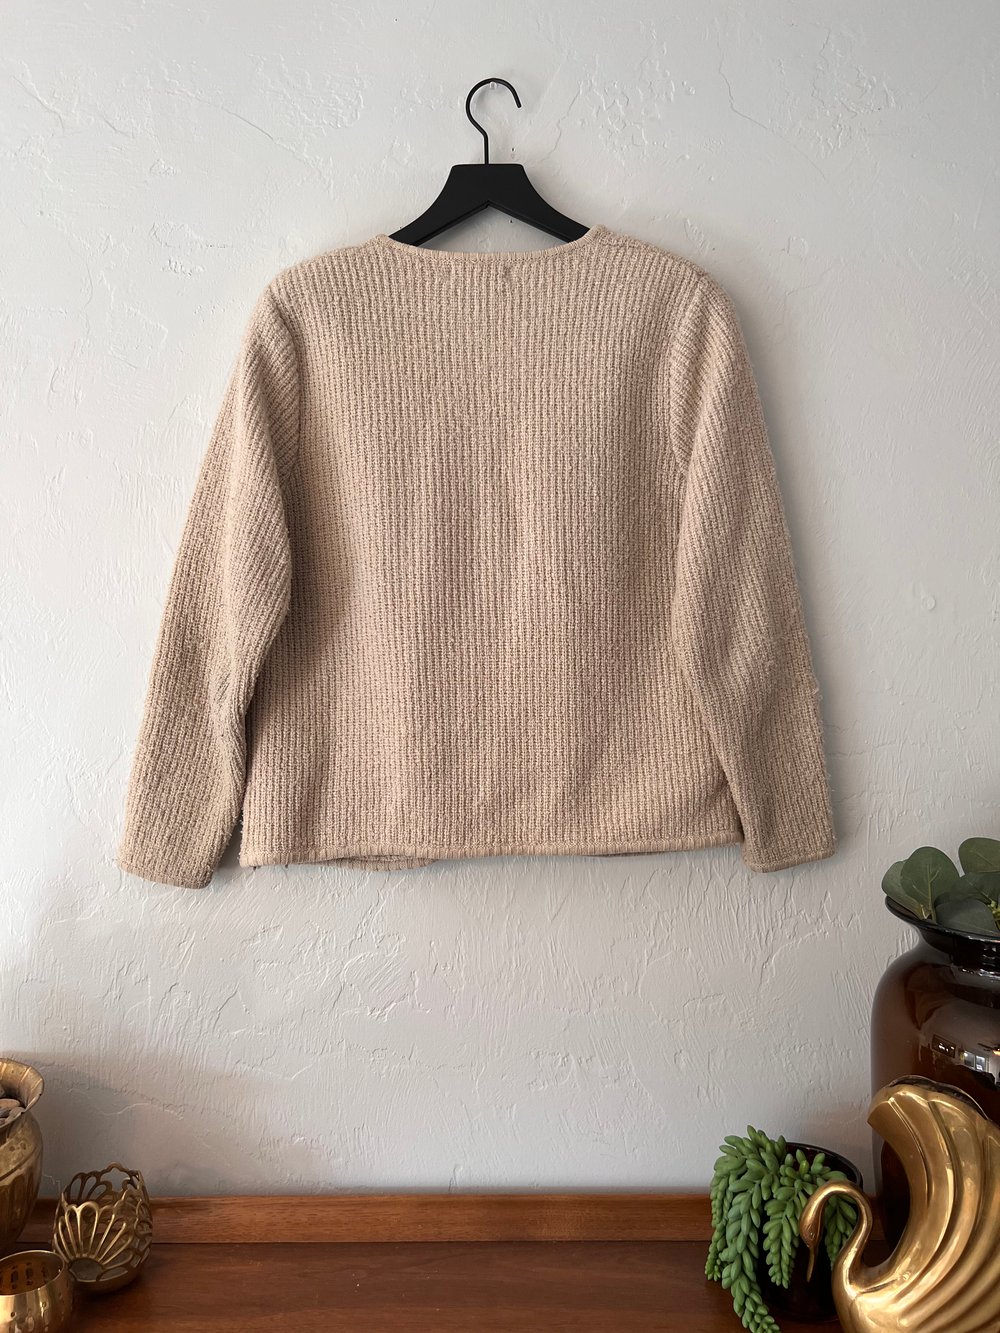 Vintage Petites Just for You Acrylic Cardigan (S)